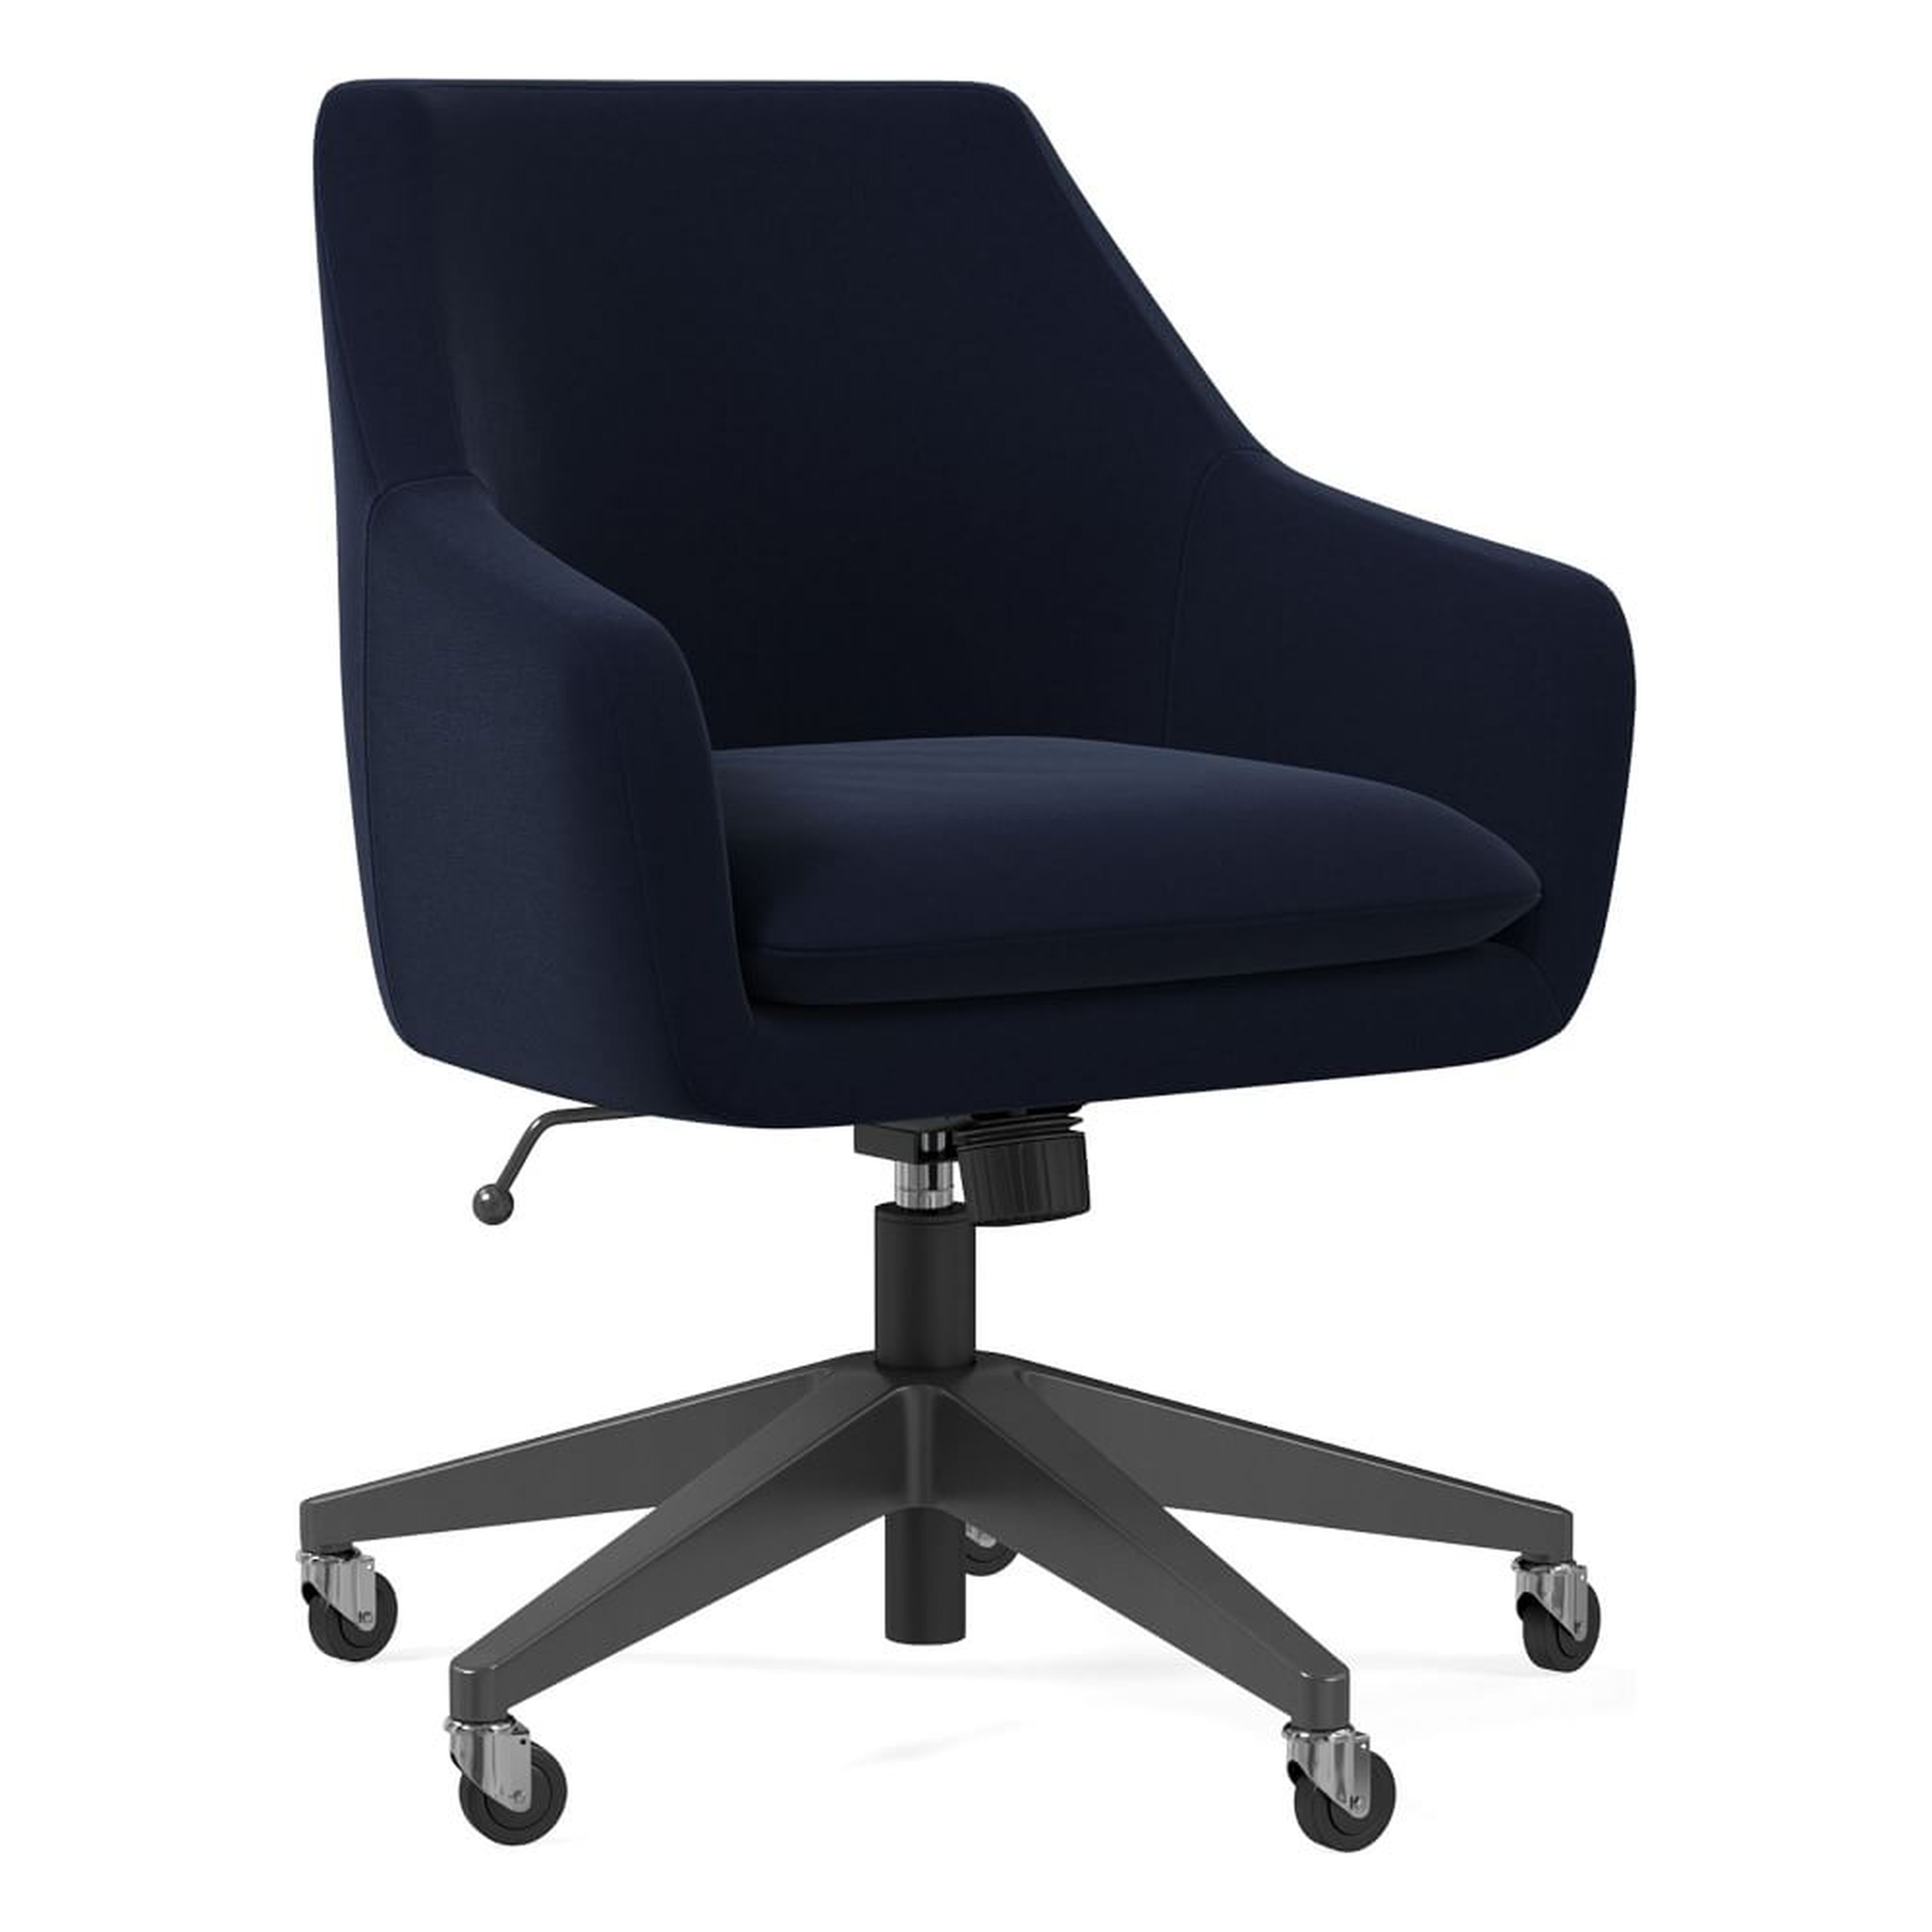 Helvetica Upholstered Office Chair - West Elm